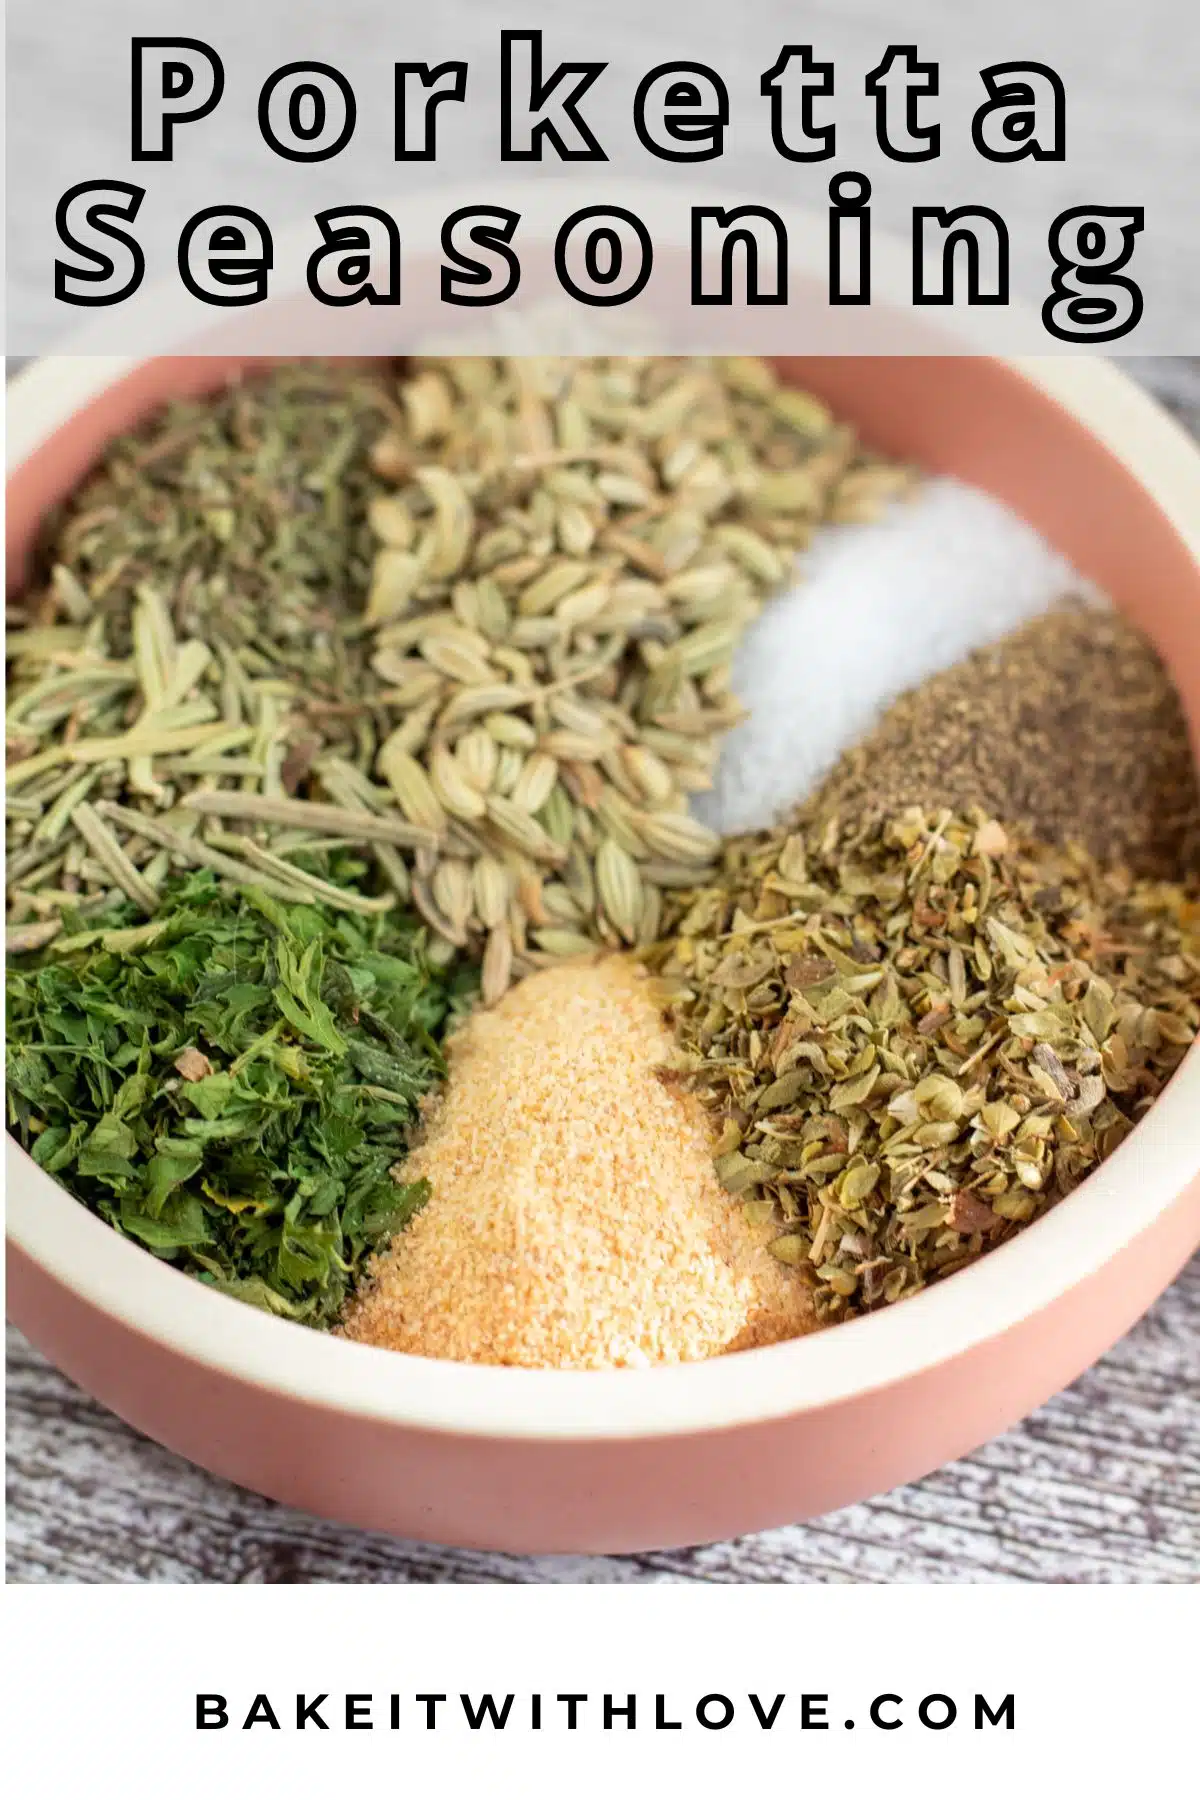 Pin image with text of spices used in porketta seasoning.